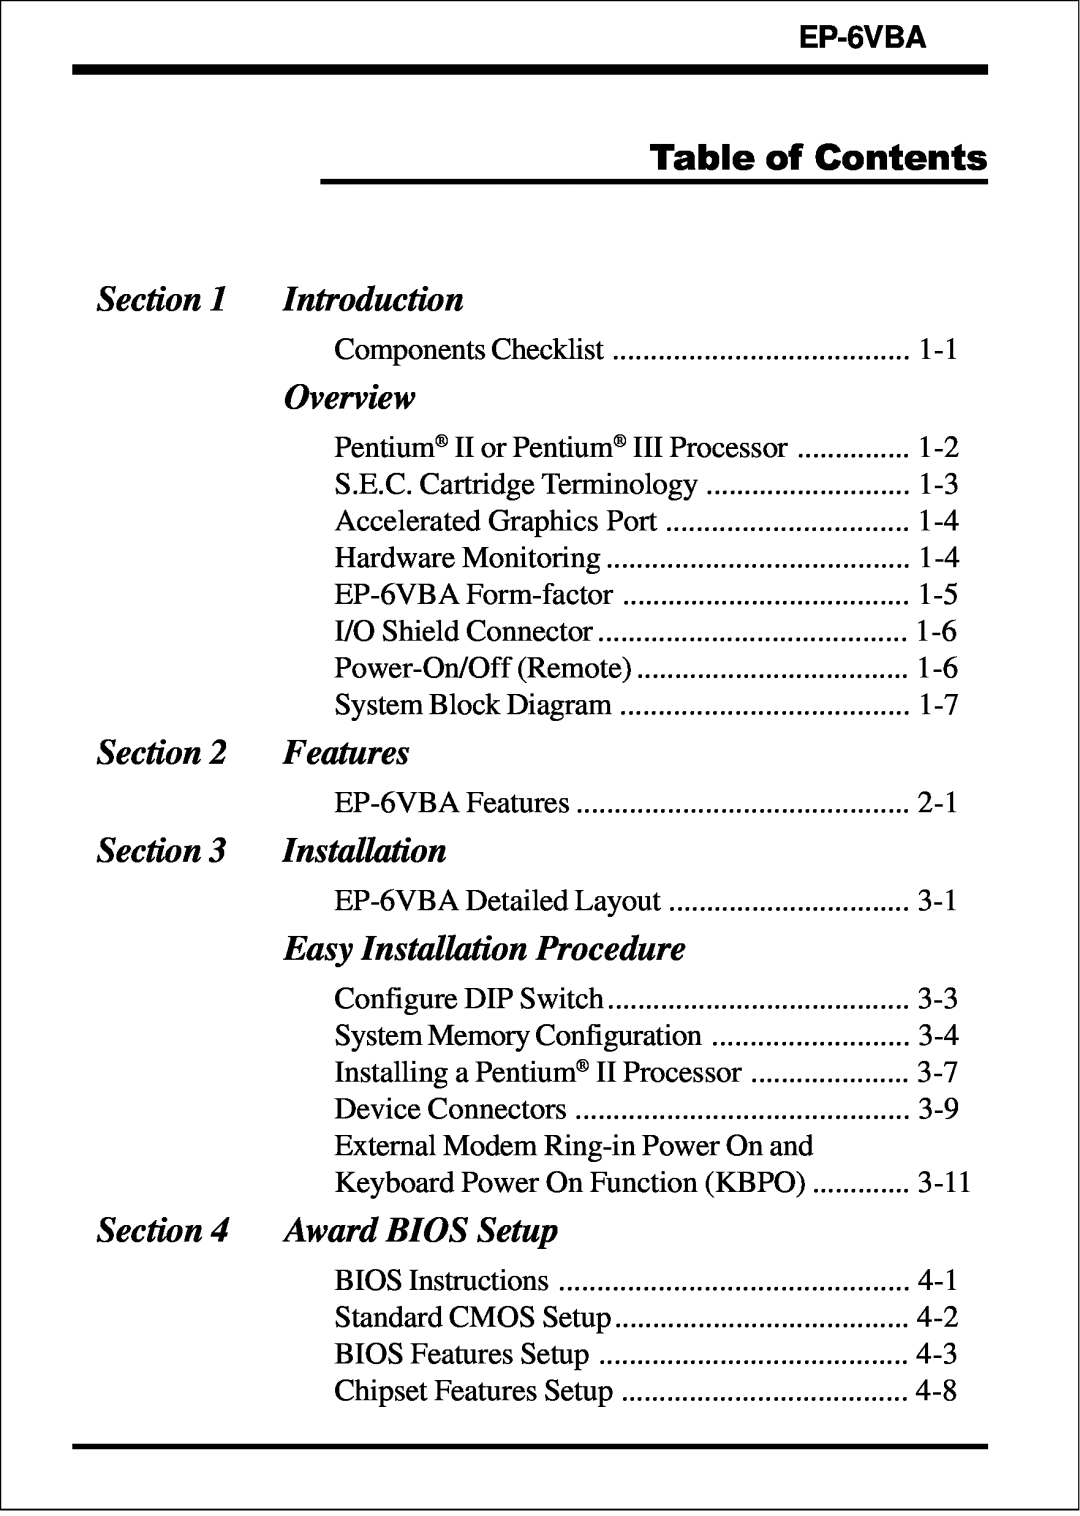 EPoX Computer EP-6VBA specifications Table of Contents, Standard CMOS Setup 